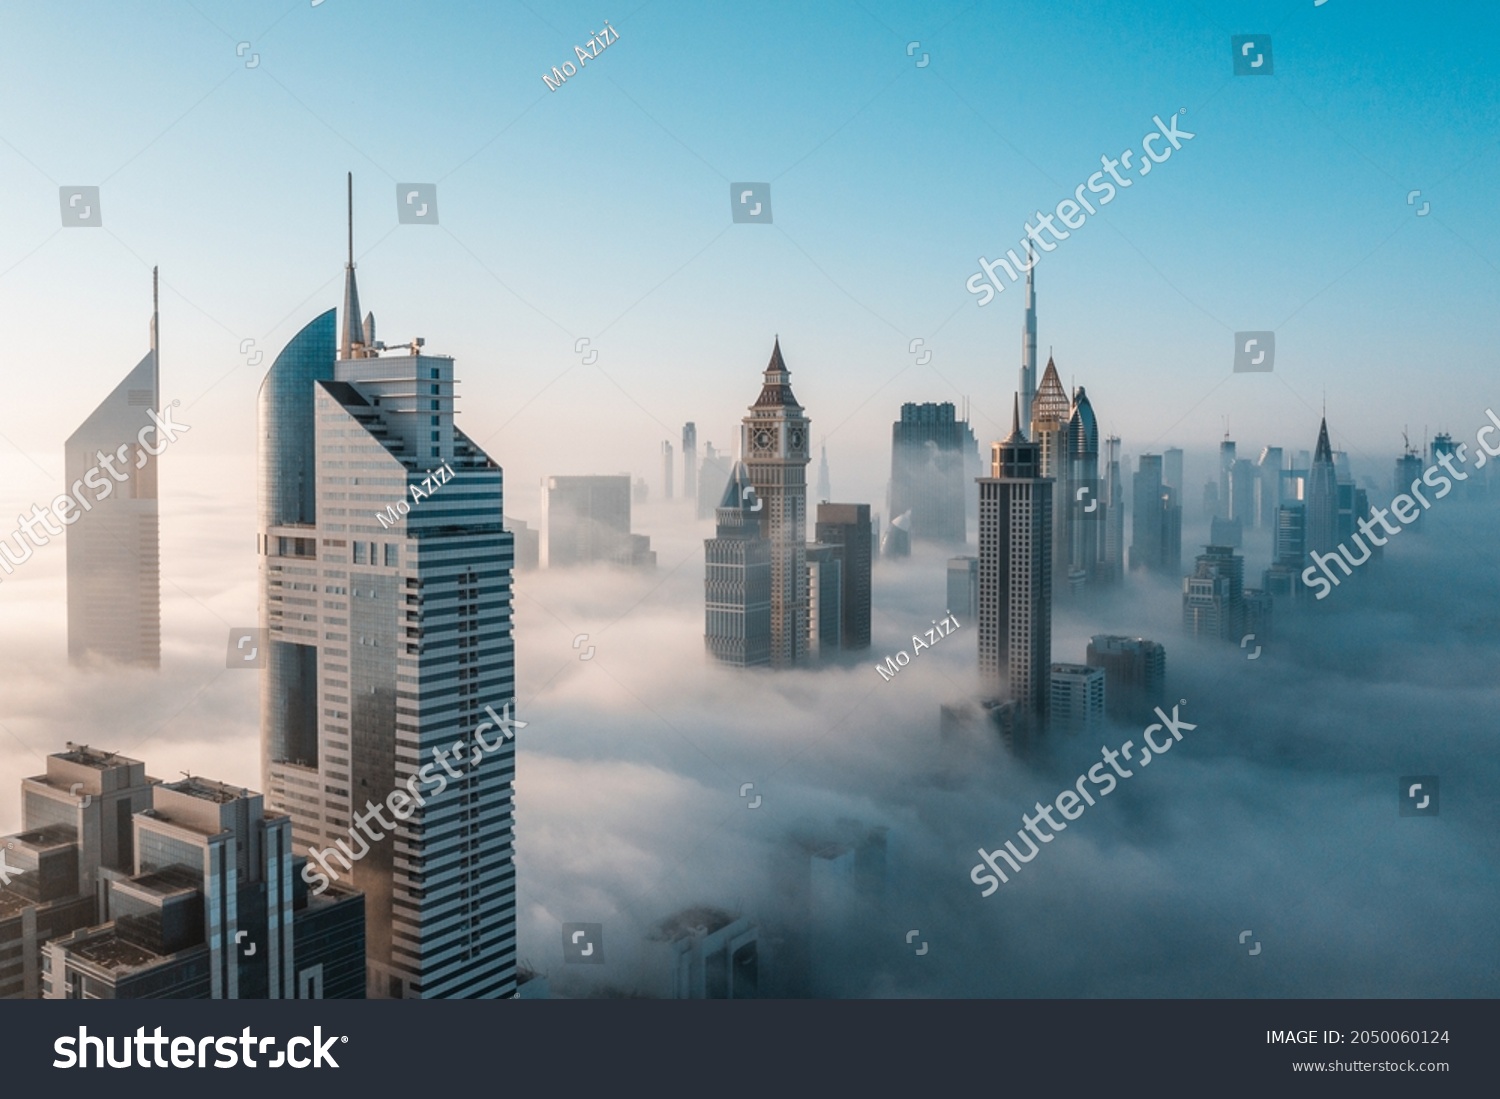 Mega tall skyscrapers of Dubai covered in early morning think fog. Rare aerial perspective.  #2050060124